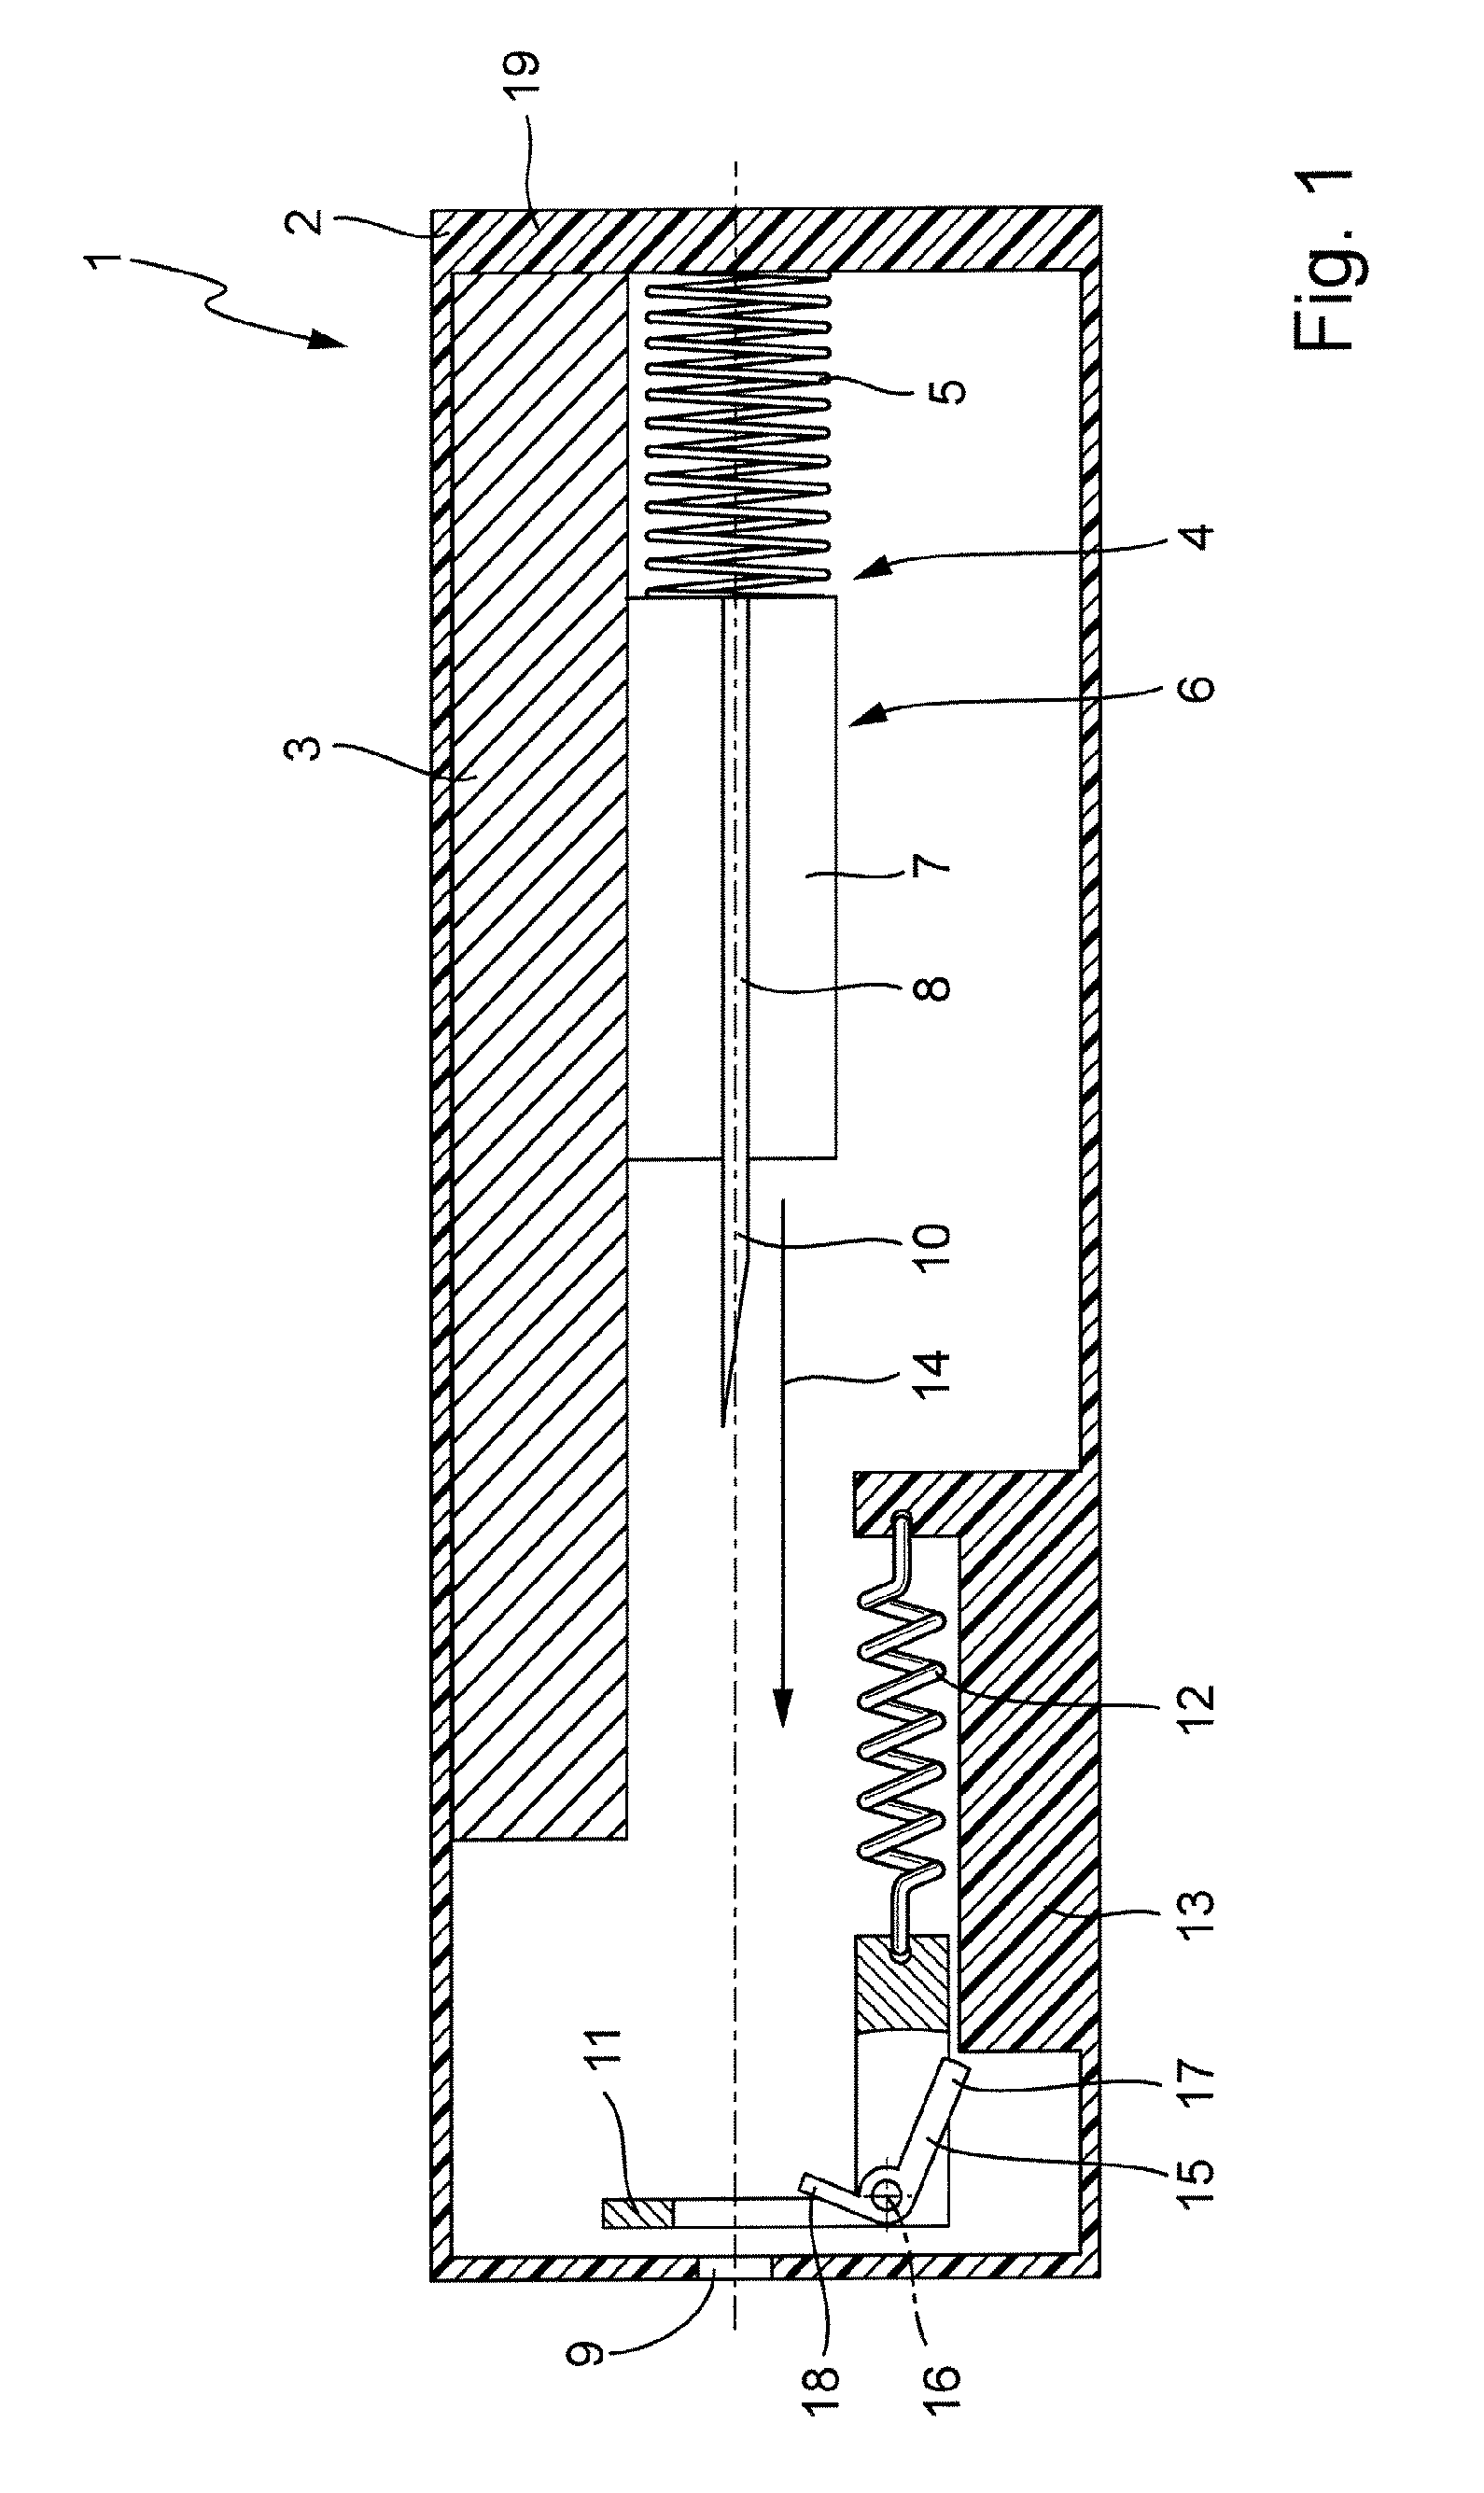 Blood collection system for collecting blood from a body part for diagnostic purposes